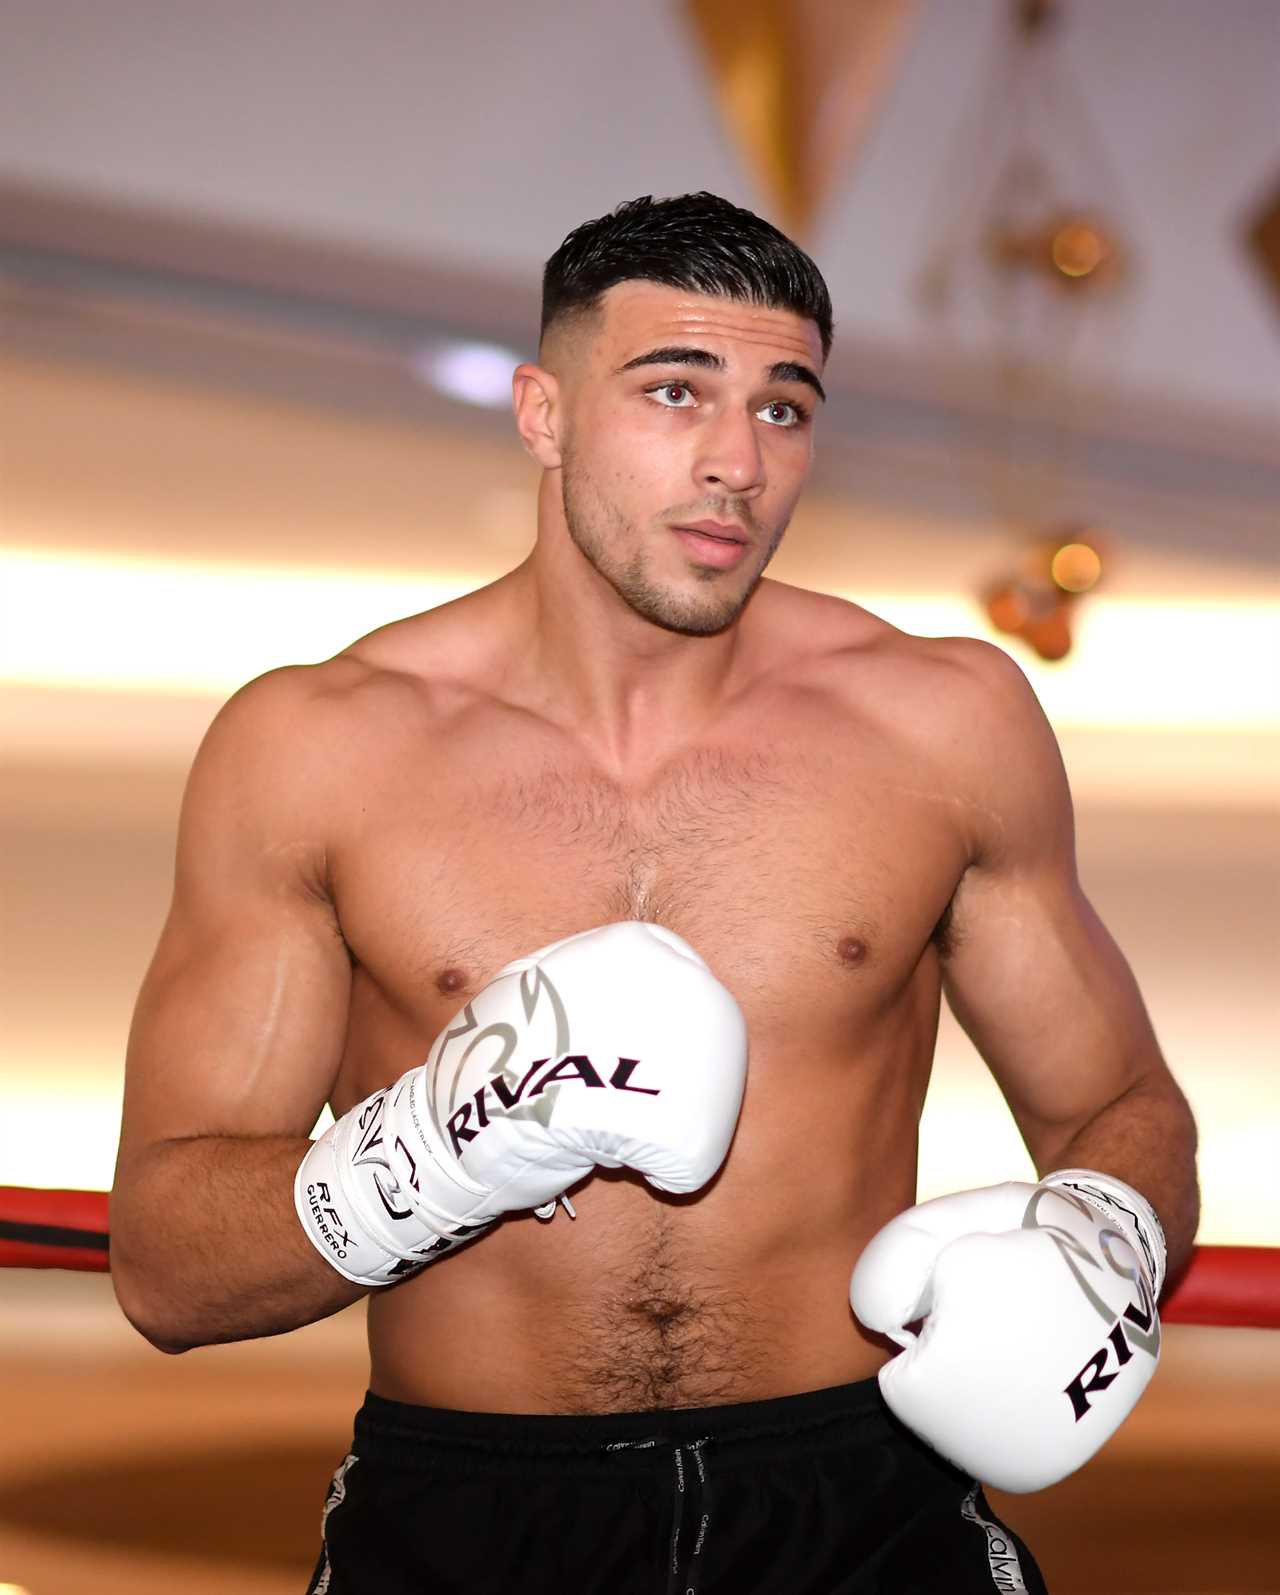 Tommy Fury will not be able to fight Tyson or John after Jake Paul lost his heavyweight champion.